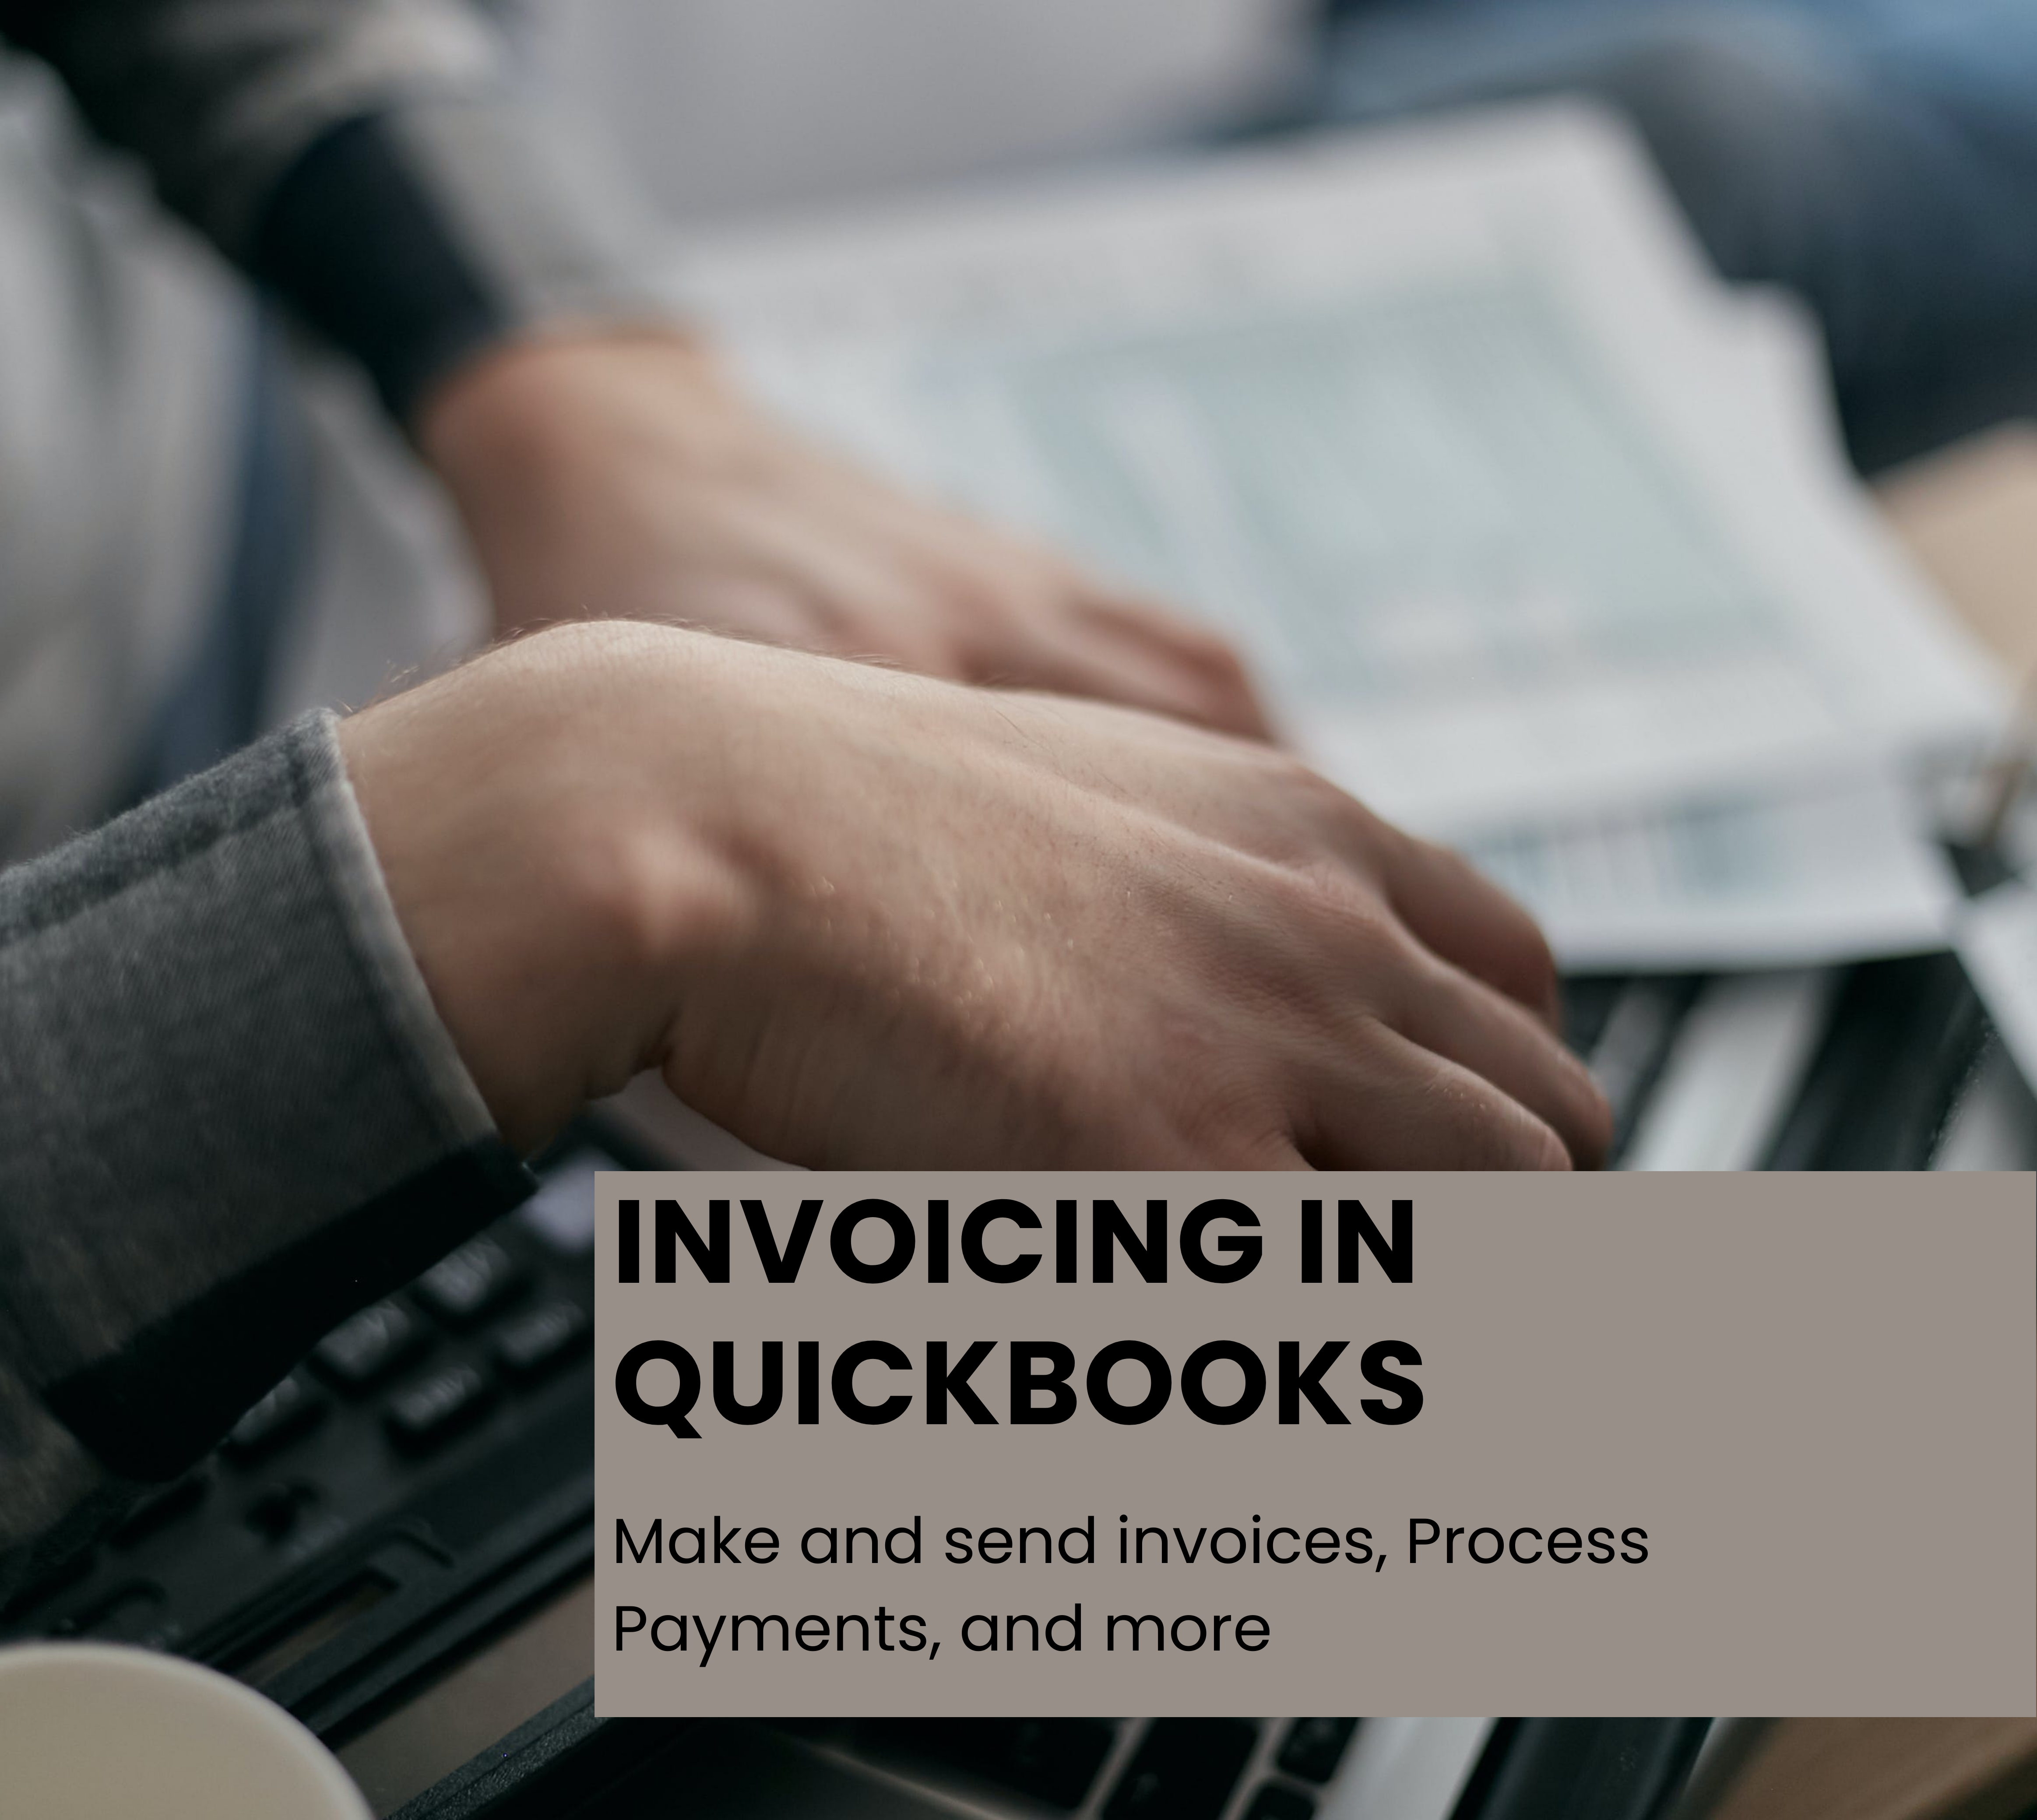 Invoicing in QuickBooks Make and send invoices, Process Payments, and more